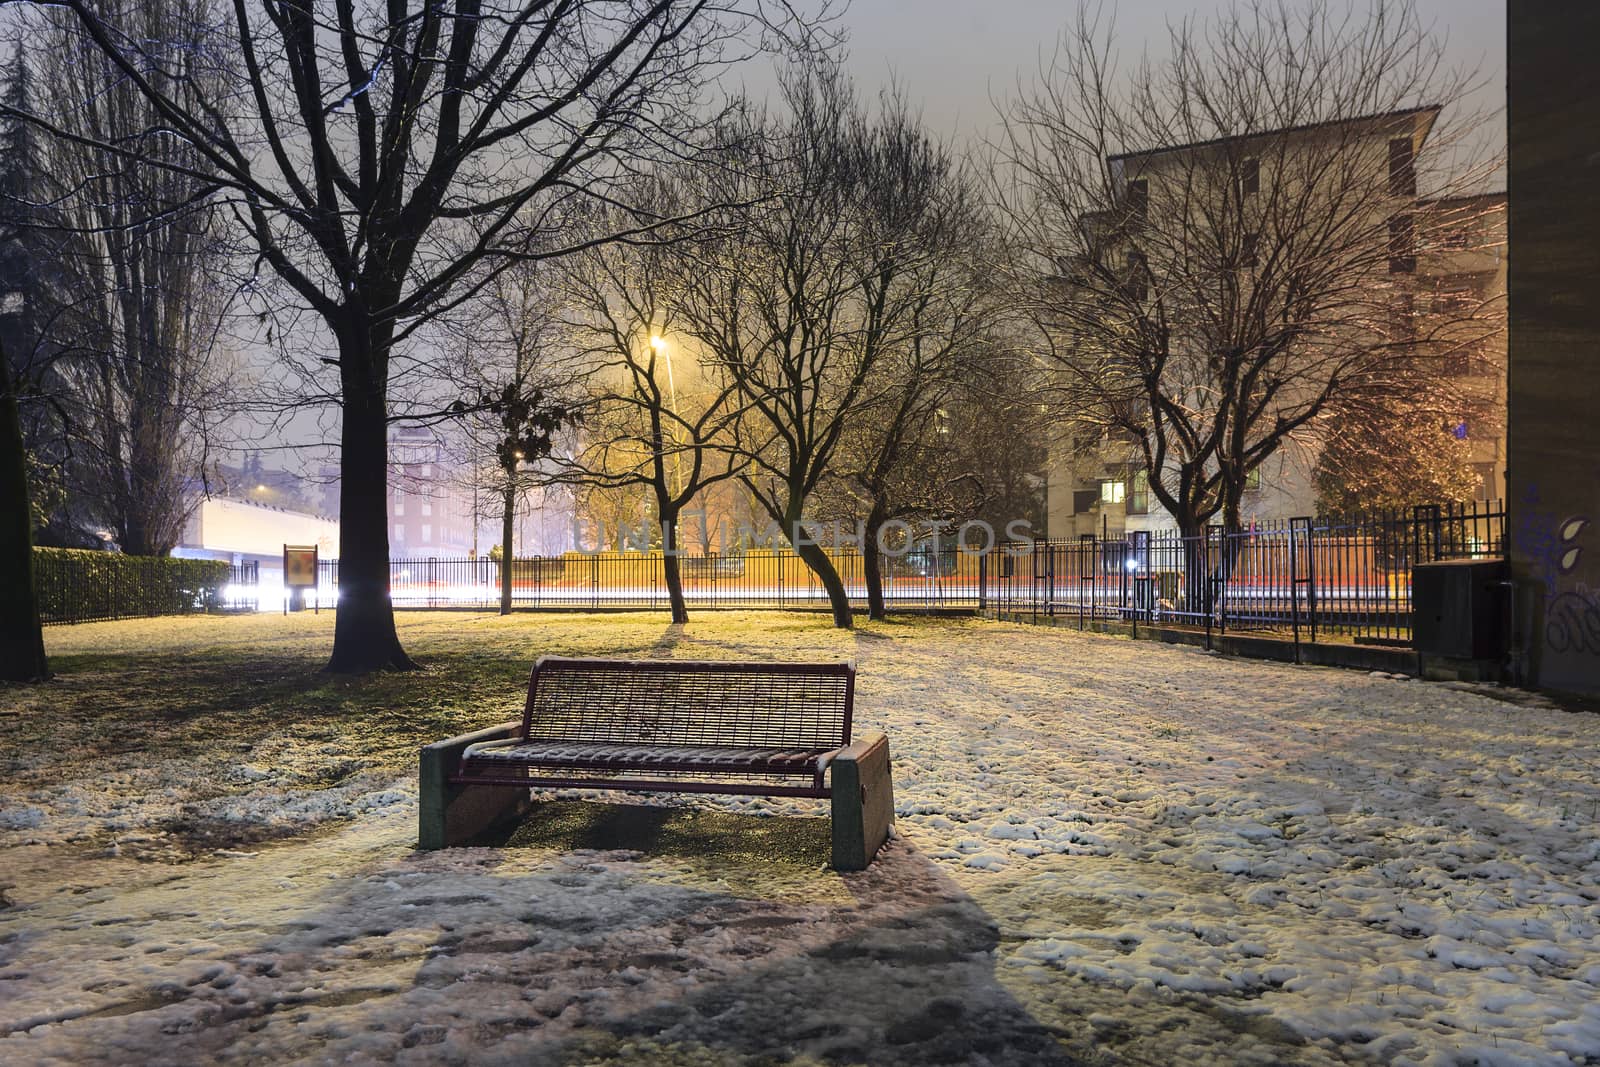 A frozen solitary bench into a small city park covered by snow and ice, Monza, Italy